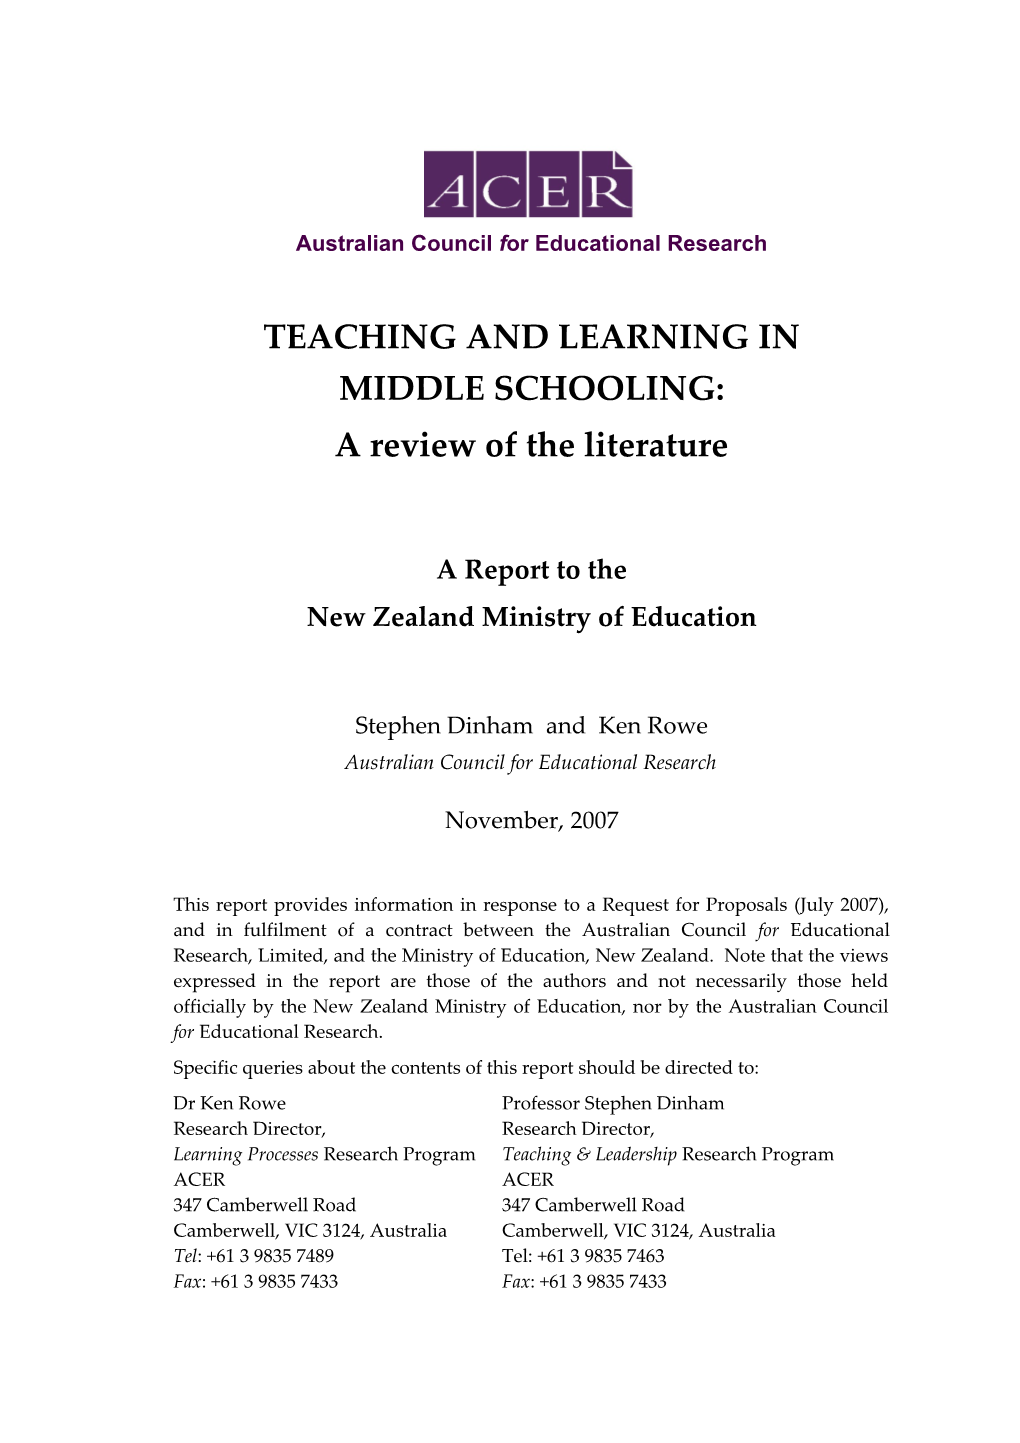 Teaching and Learning Middle Schooling: a Review of the Literature